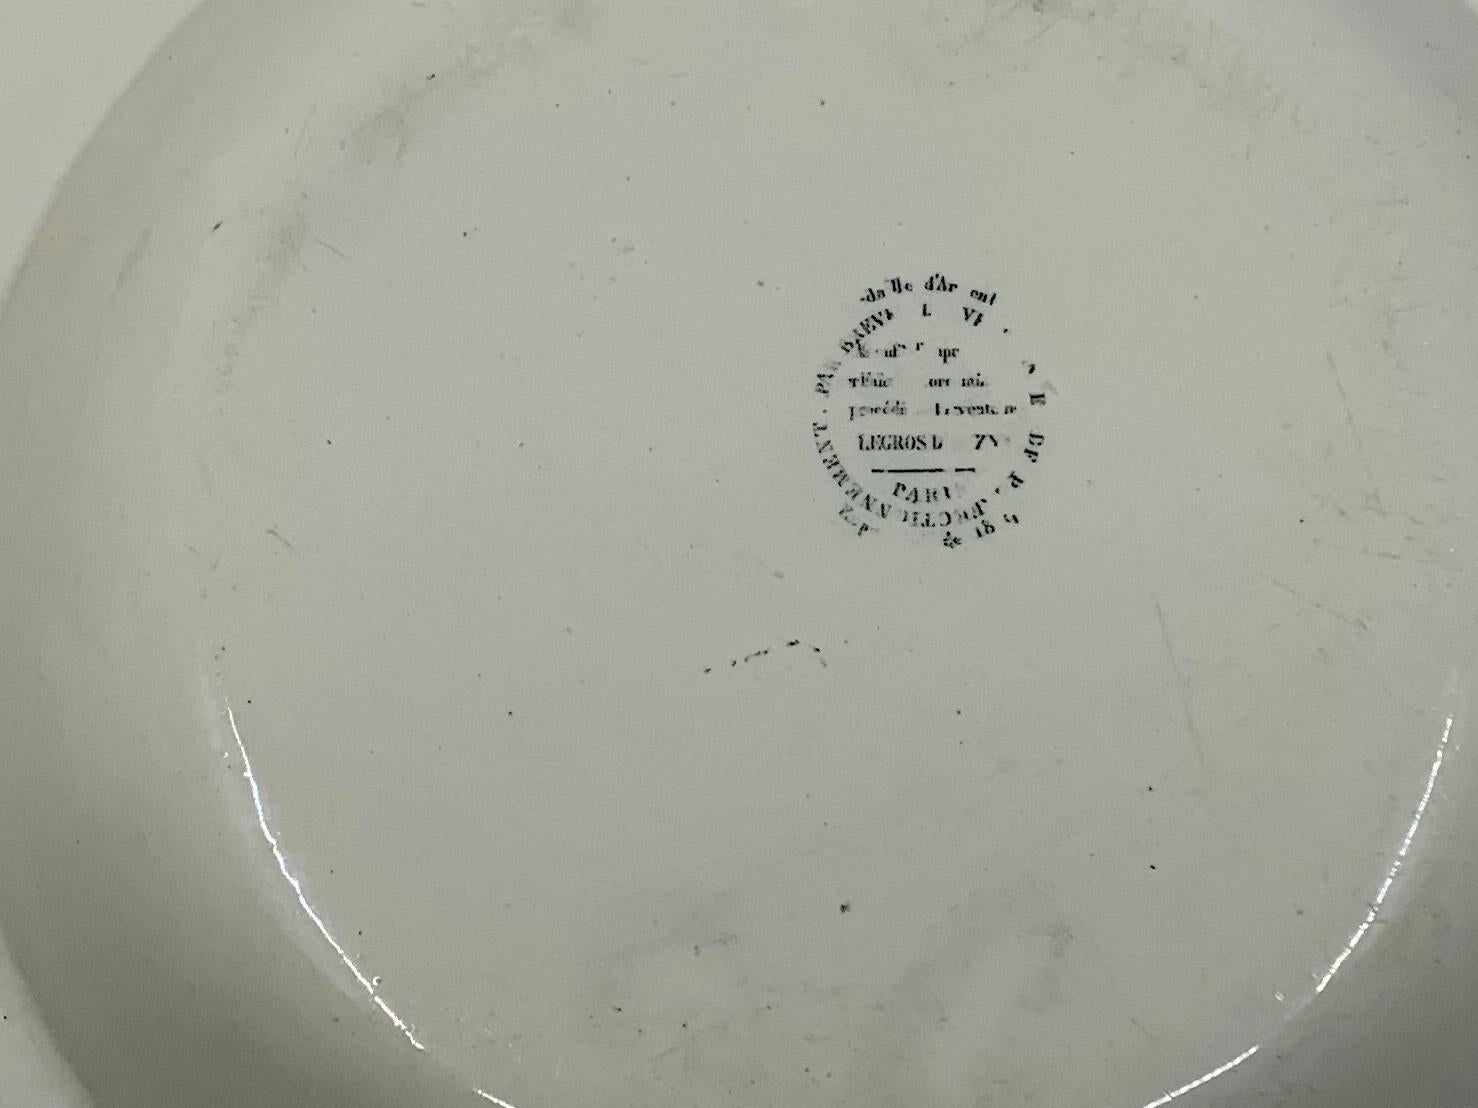 Neoclassical Creil Creamware Plate In Good Condition For Sale In New York, NY